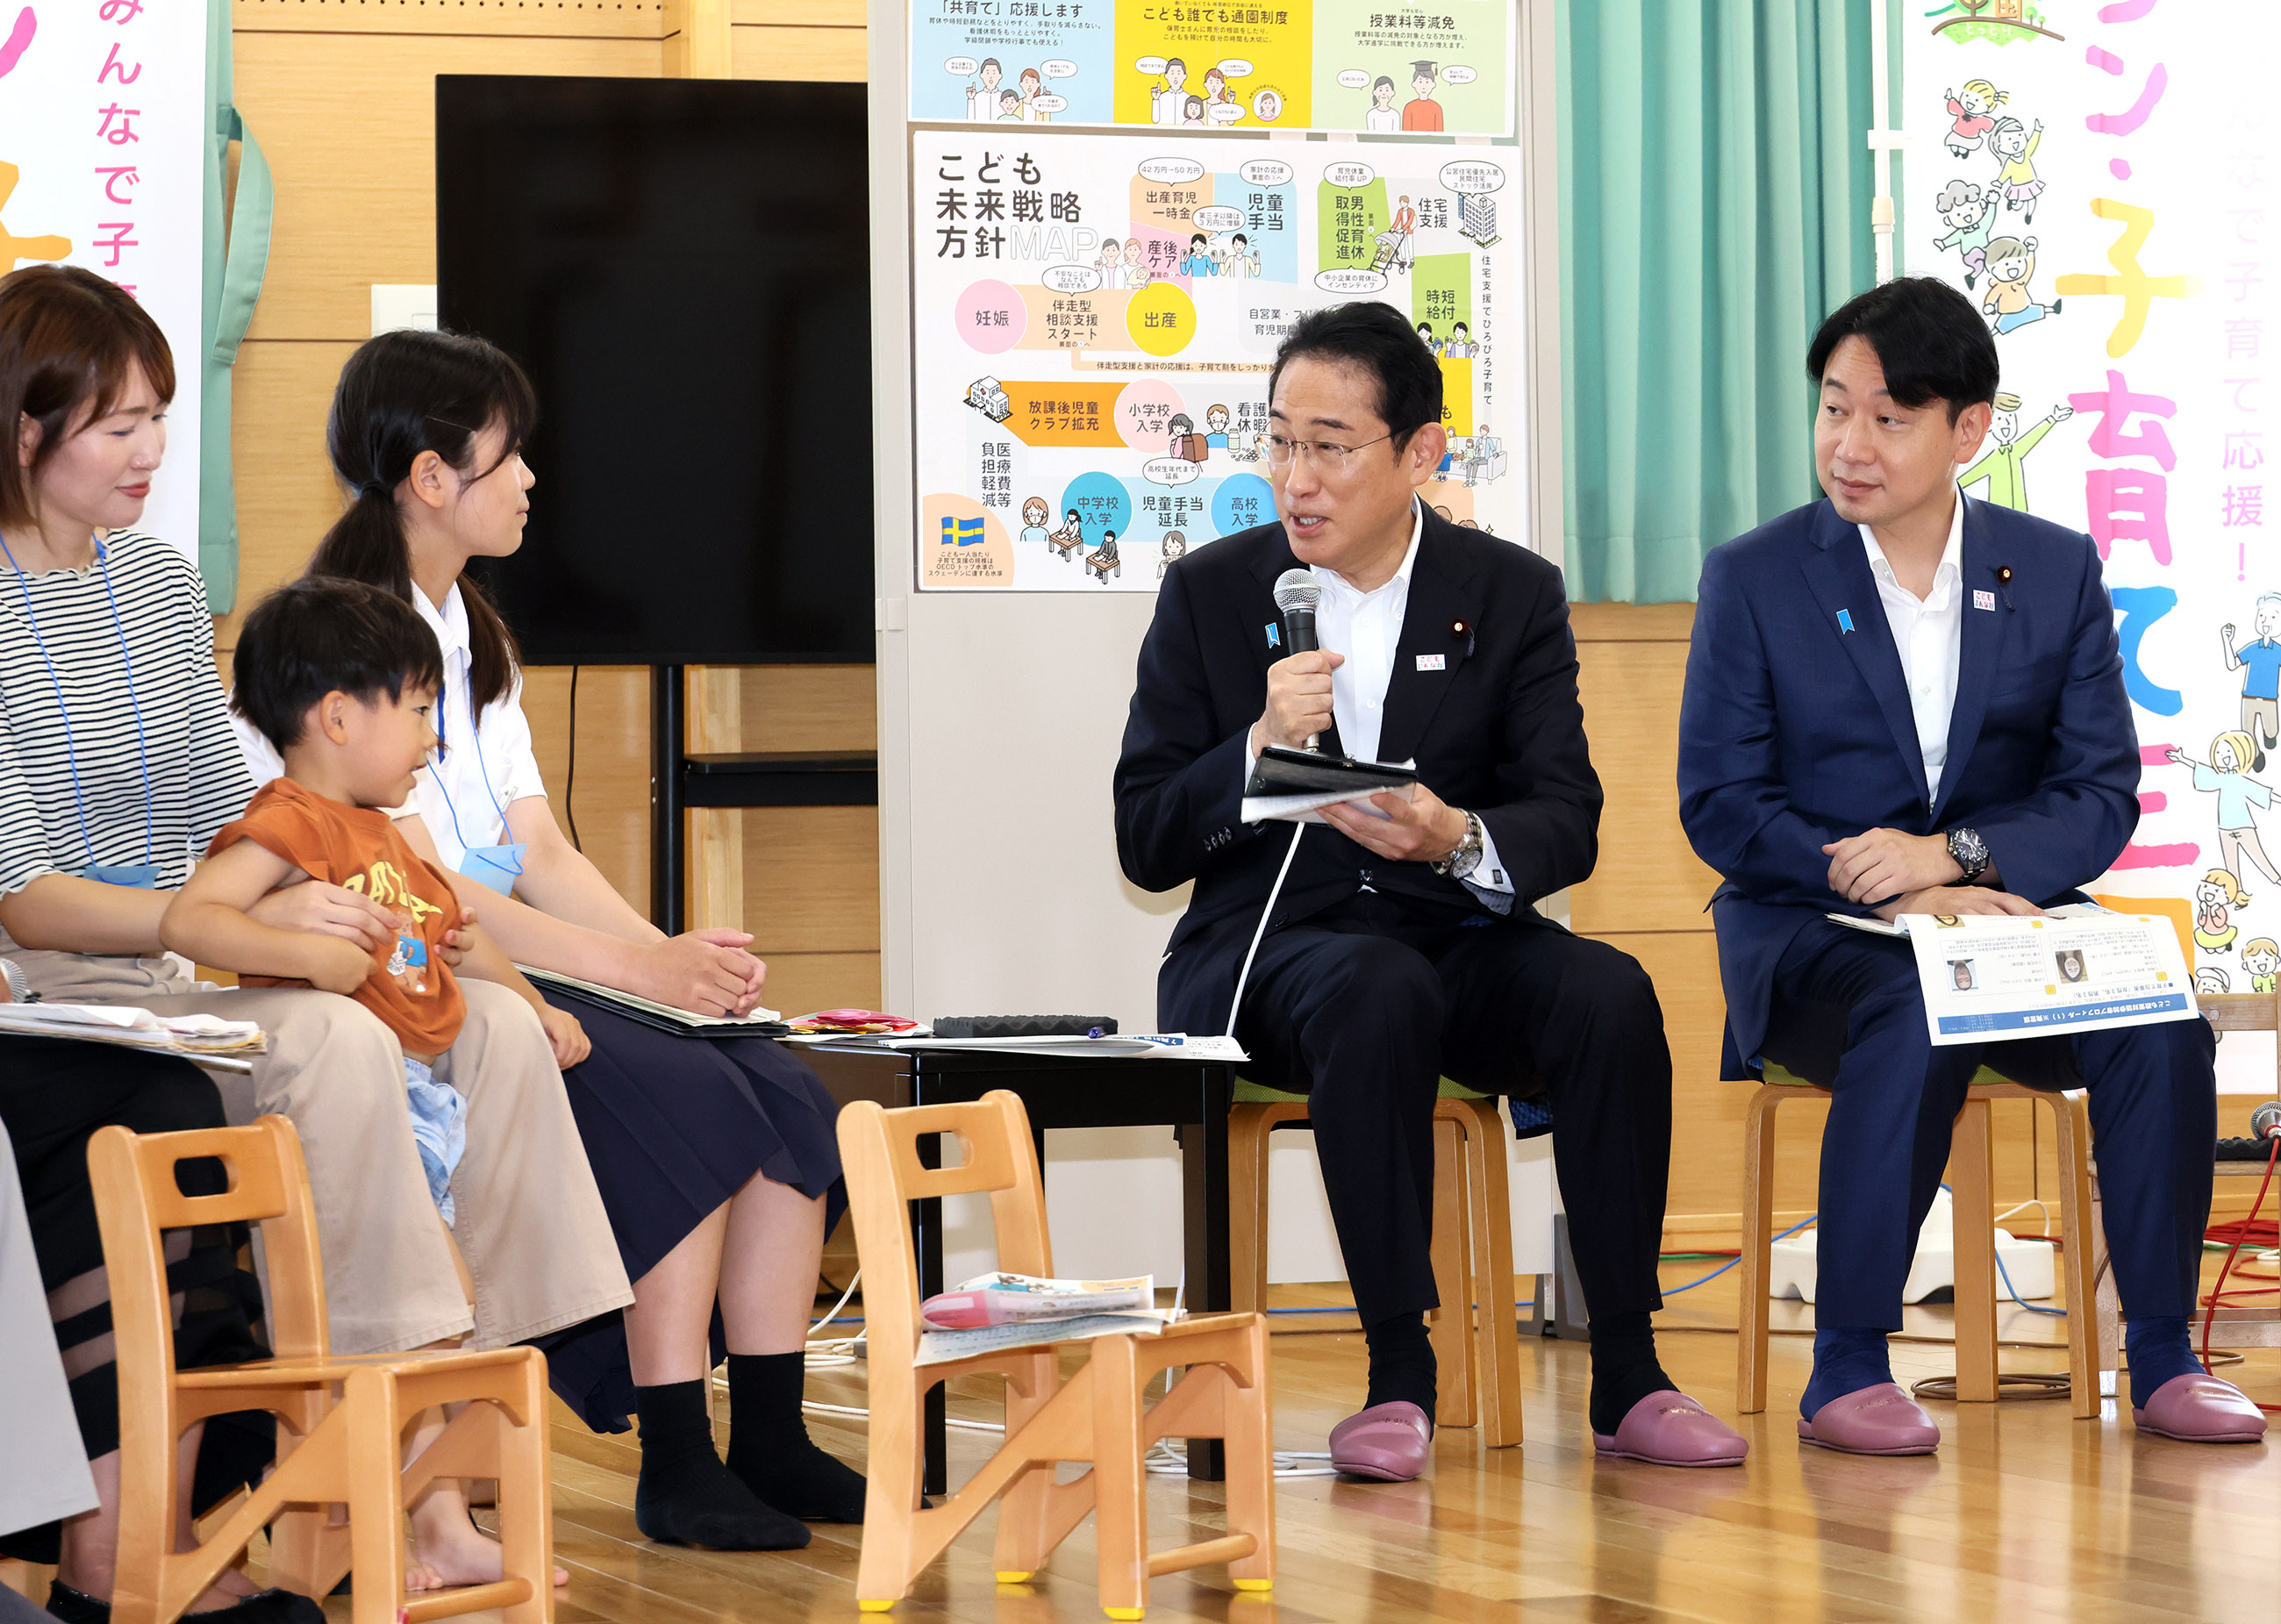 Prime Minister Kishida talking with participants of a public dialogue on policies related to children (7)